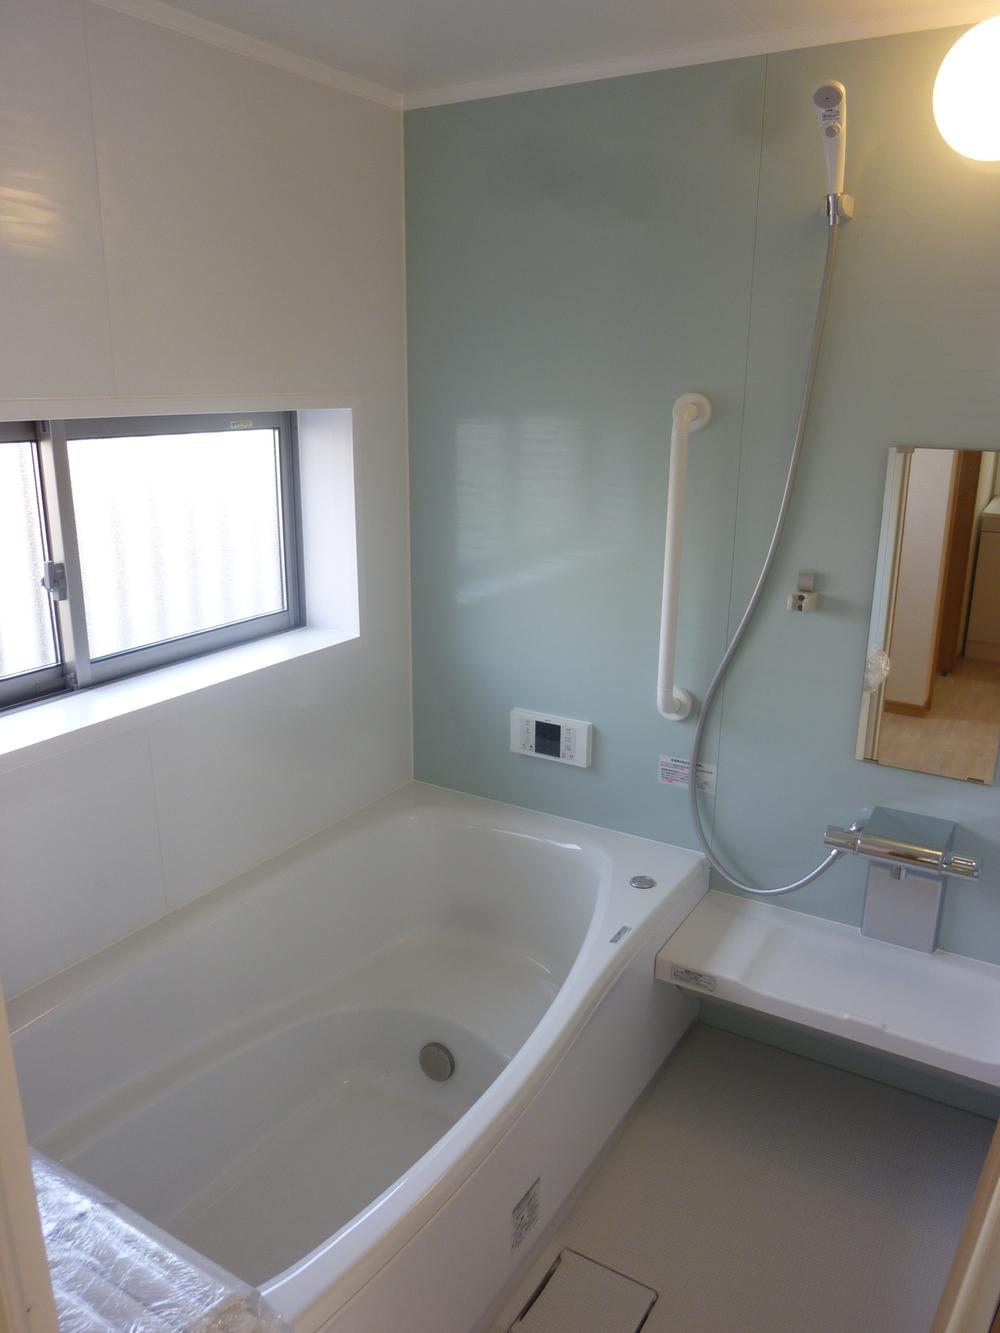 Same specifications photo (bathroom). Seller enforcement example